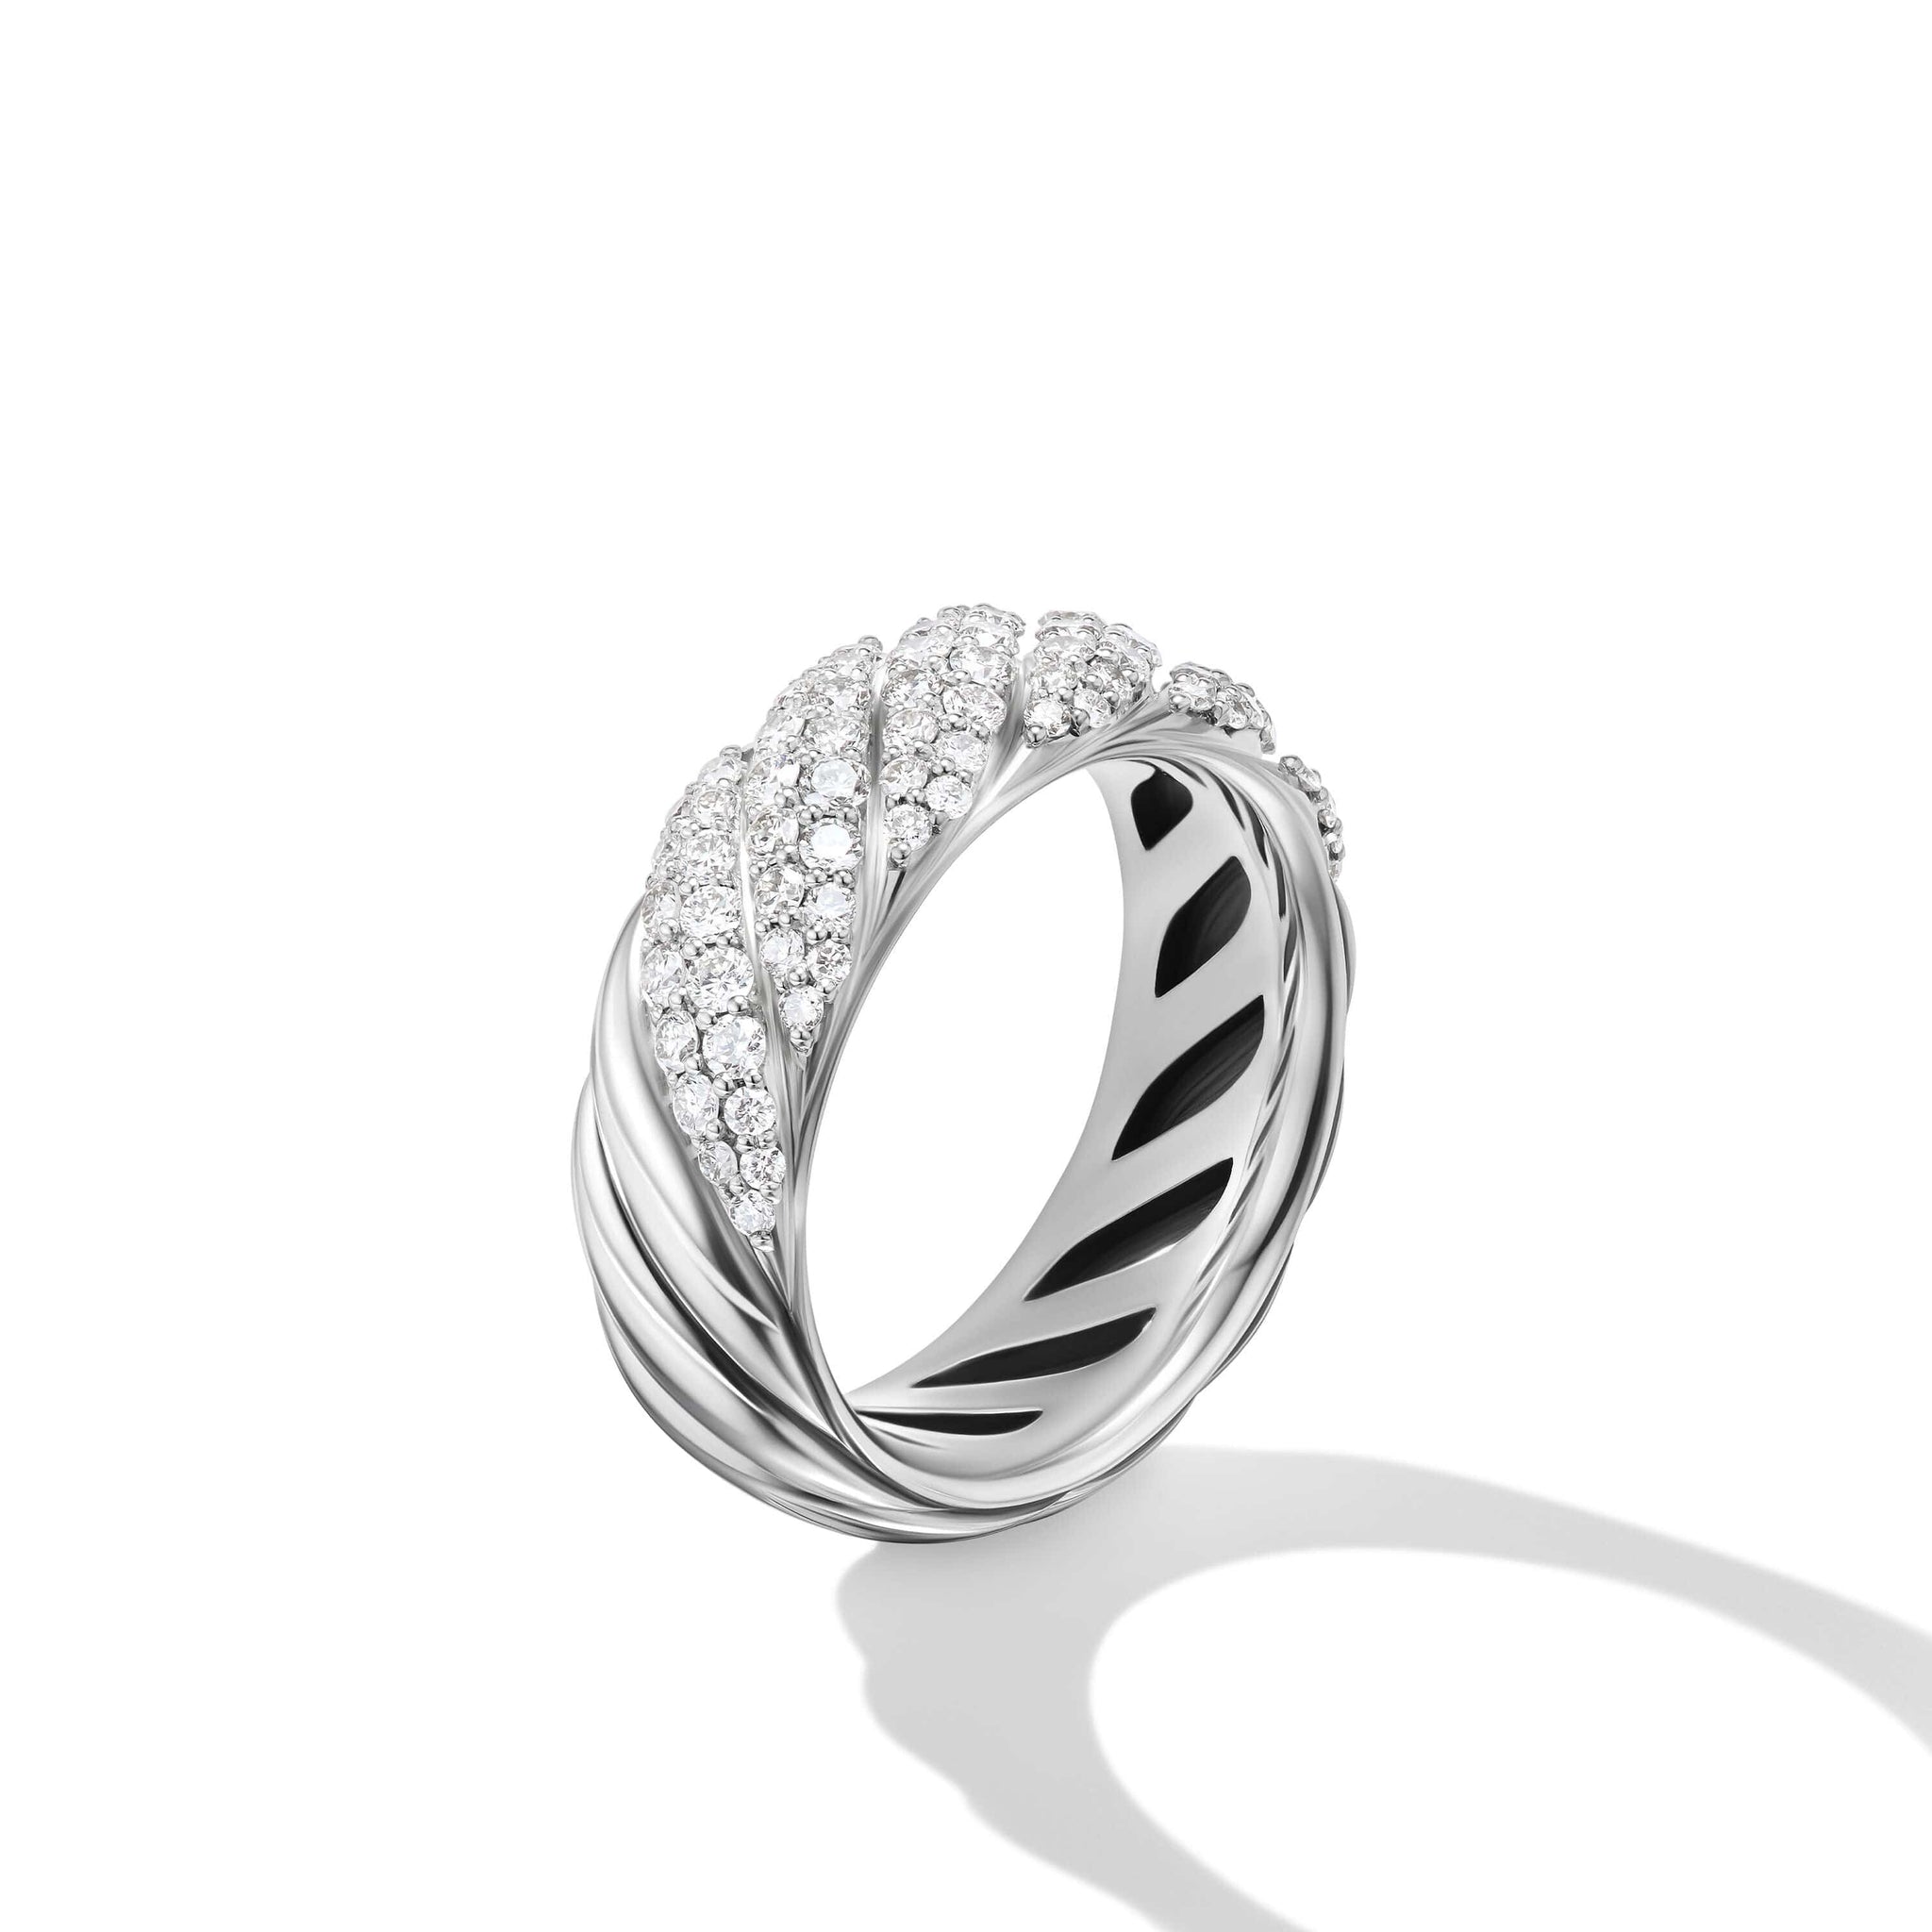 Sculpted Cable Band Ring in Sterling Silver with Pavé Diamonds